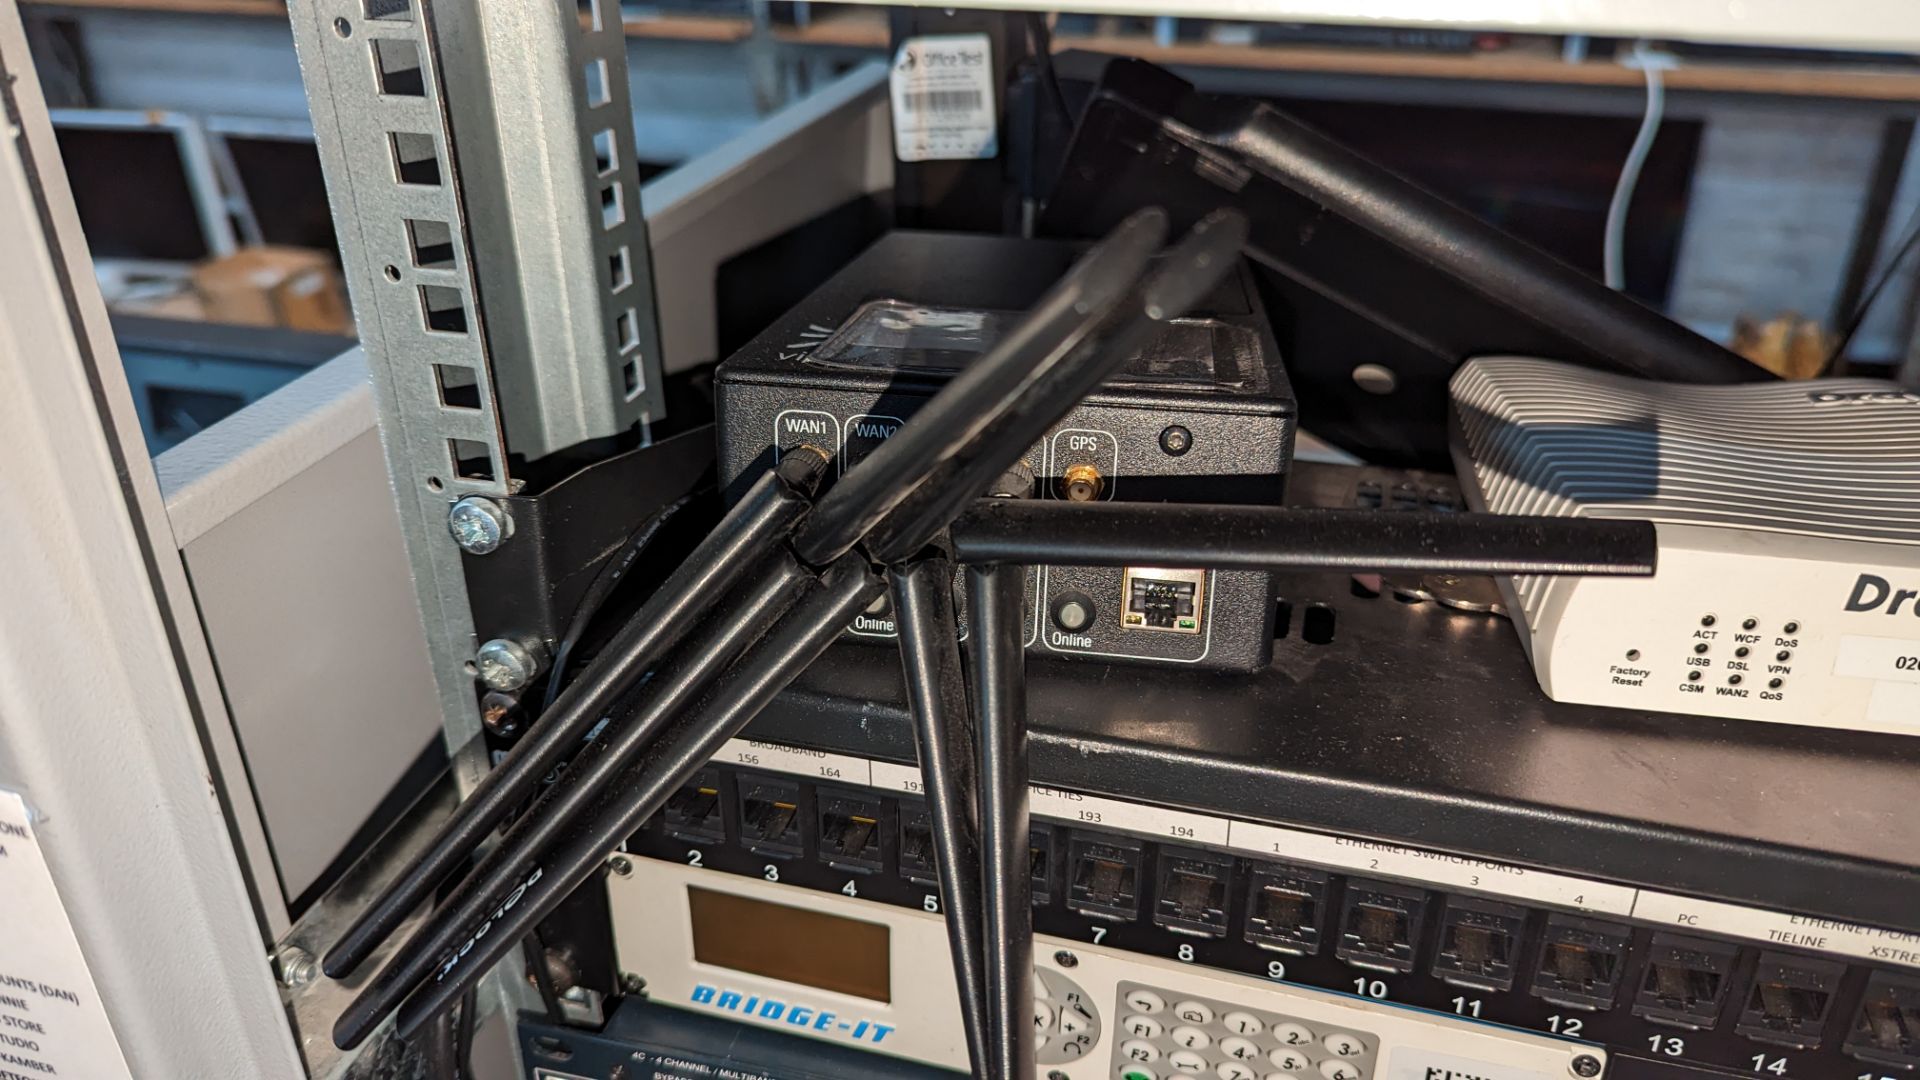 Rack mounted system and contents including Draytek modem, Vipronet wireless LAN, patch panel, Bridg- - Image 6 of 26